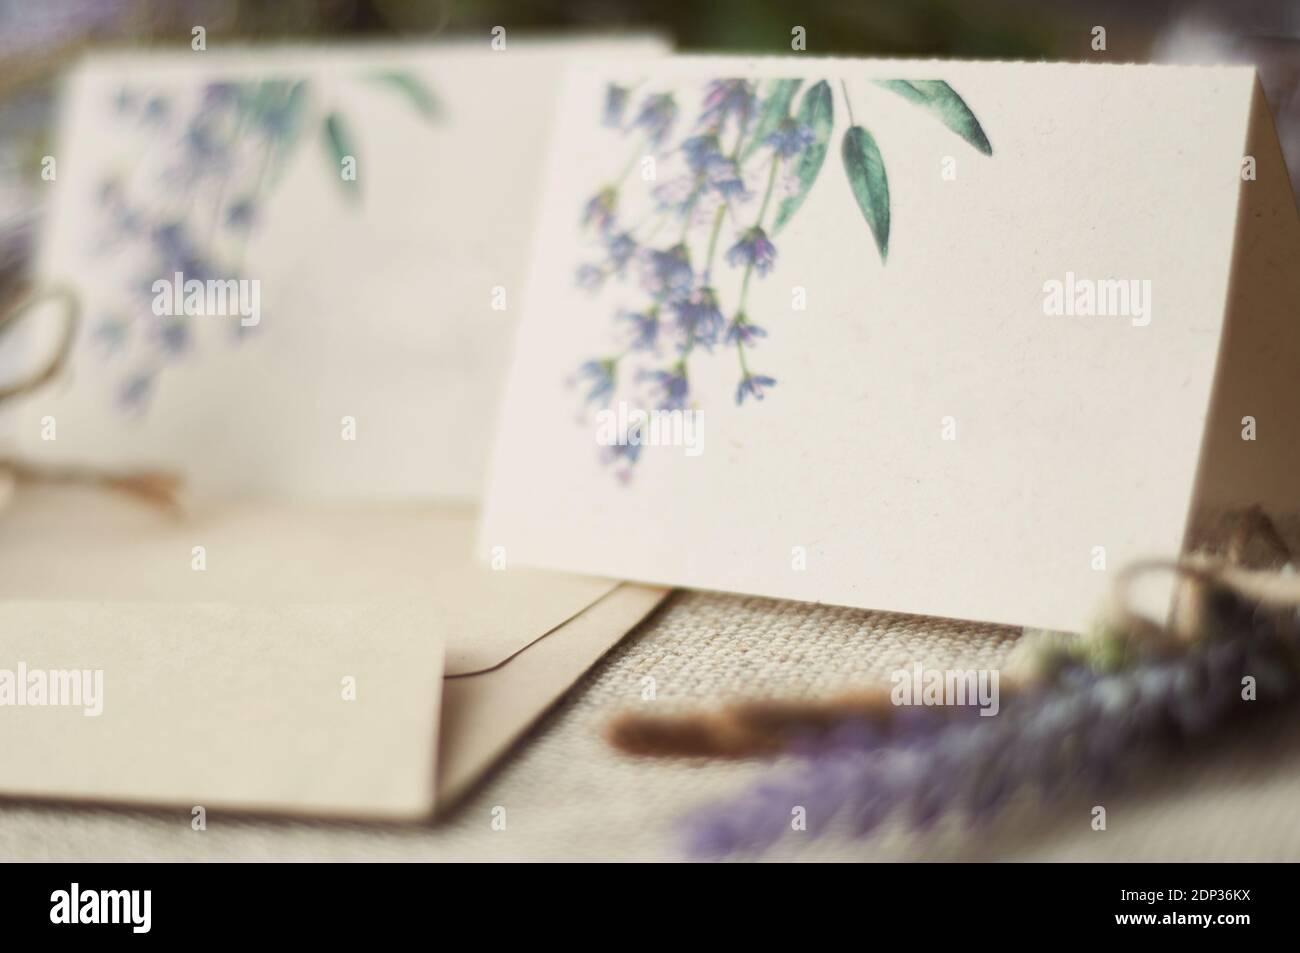 cards for lettering names blank, envelope on table with lavender flower Stock Photo